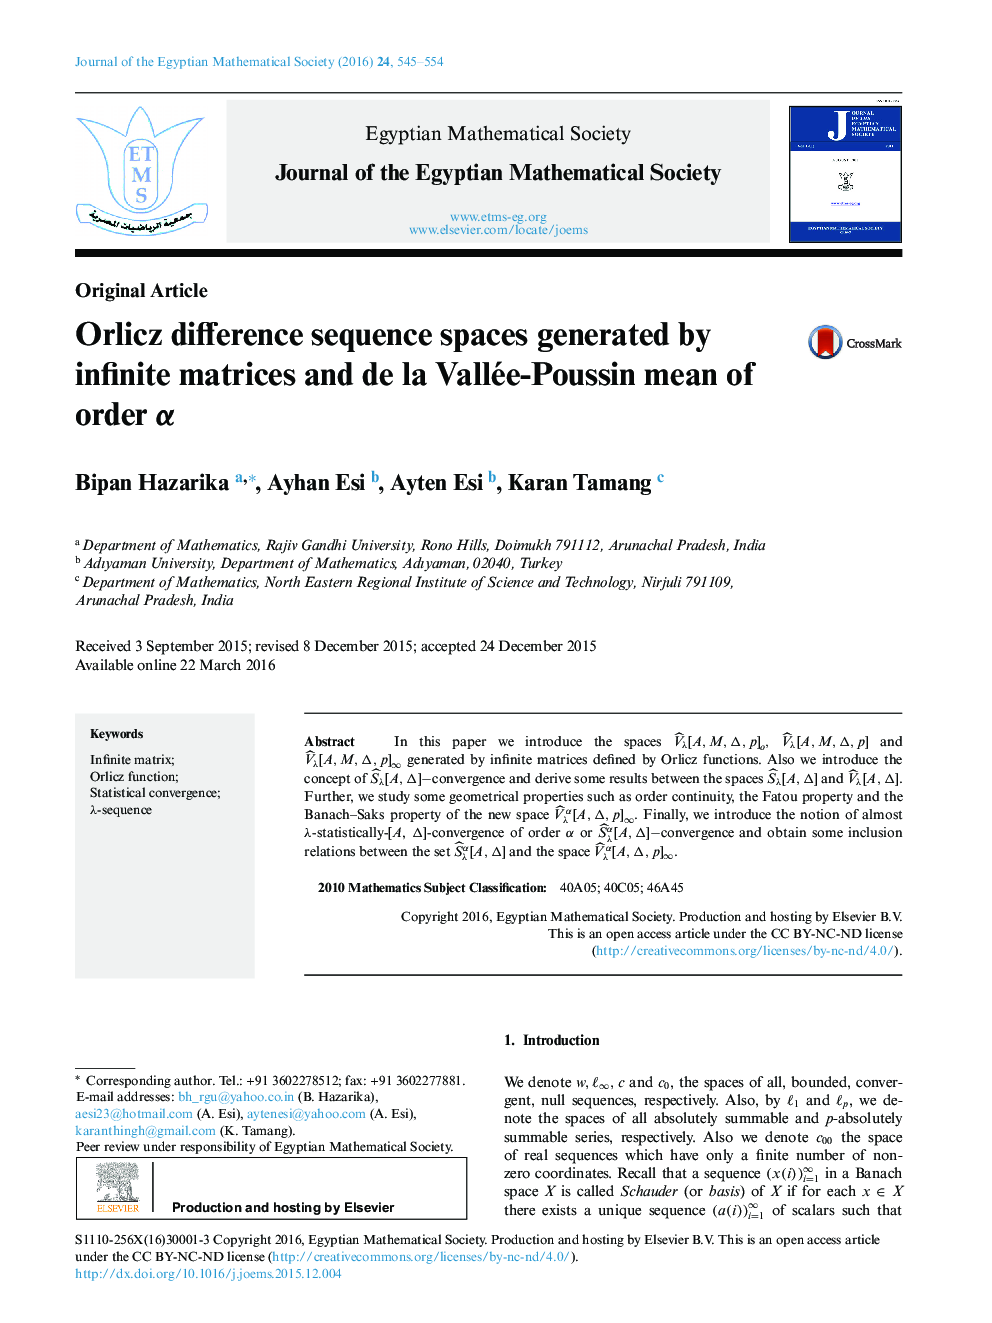 Orlicz difference sequence spaces generated by infinite matrices and de la Vallée-Poussin mean of order Î±